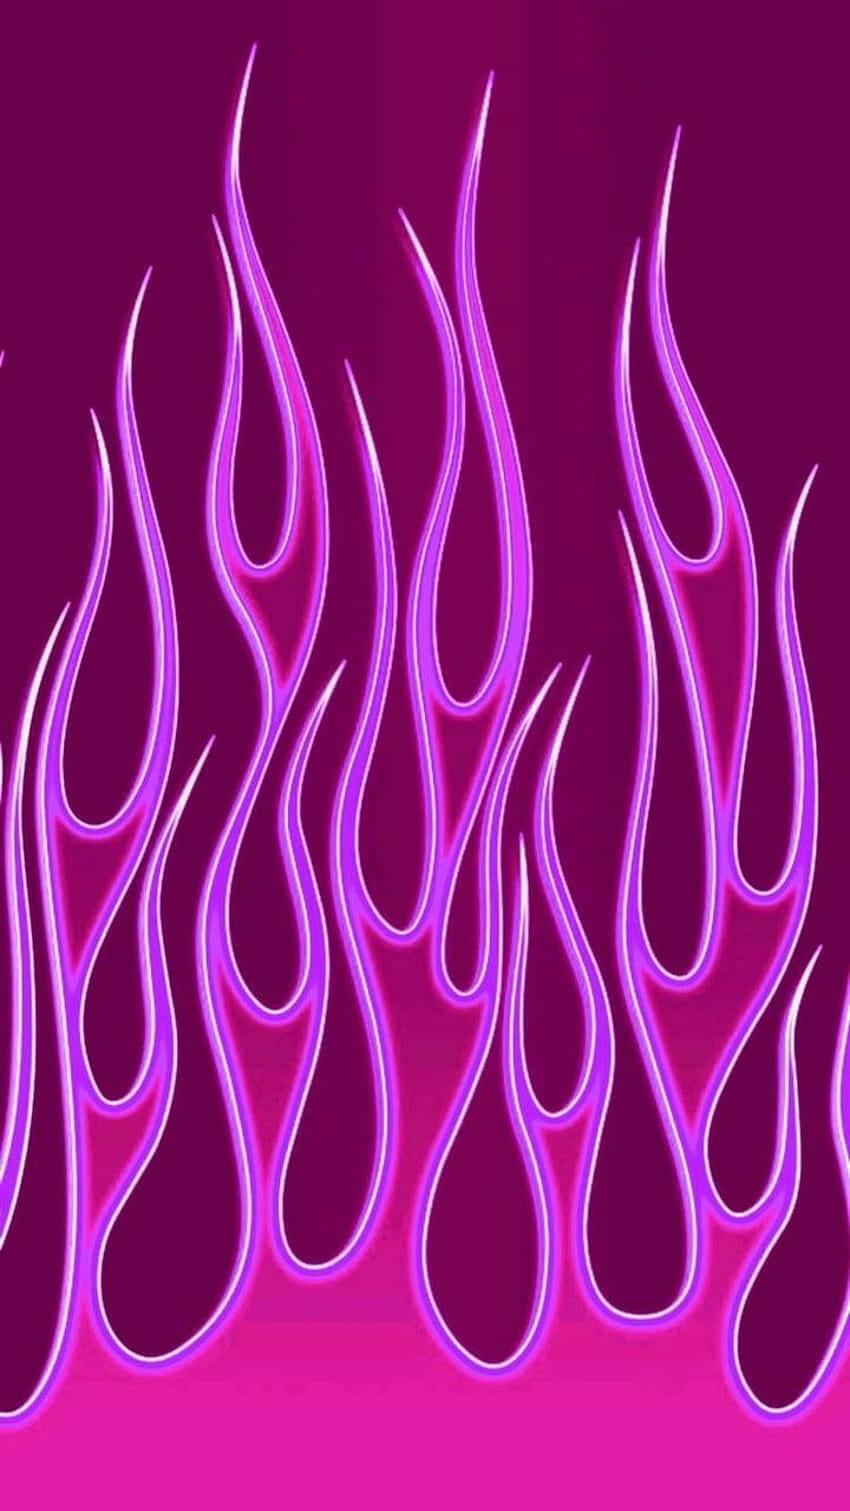 Feel The Warmth And Courage Of Pink Flames Wallpaper